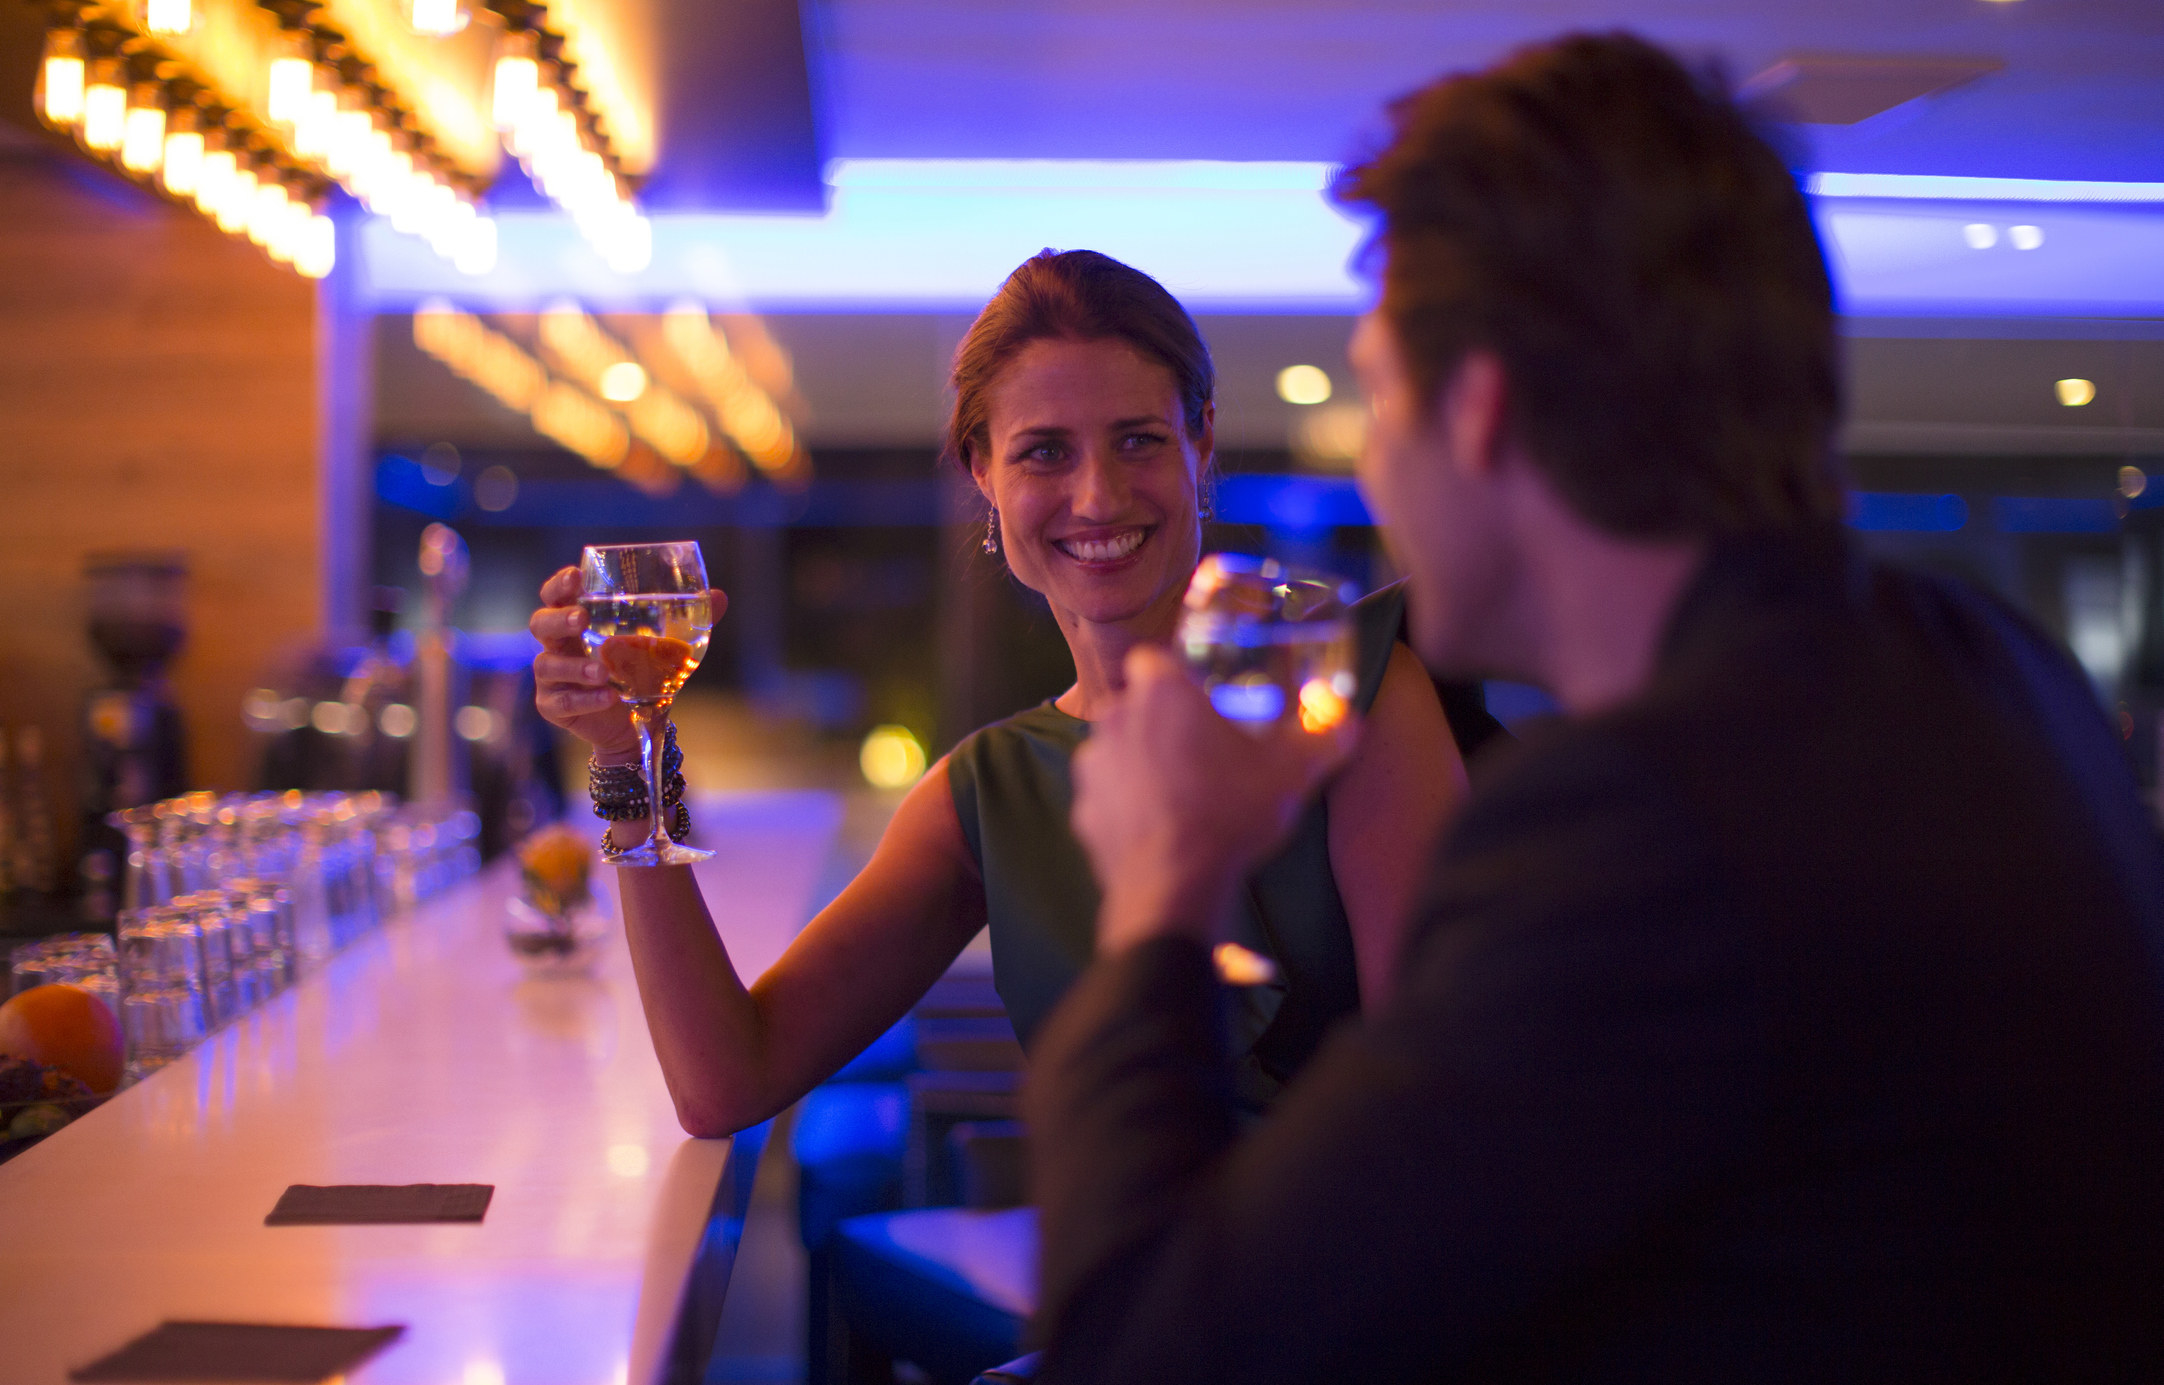 A woman and man having a drink and talking at a bar.